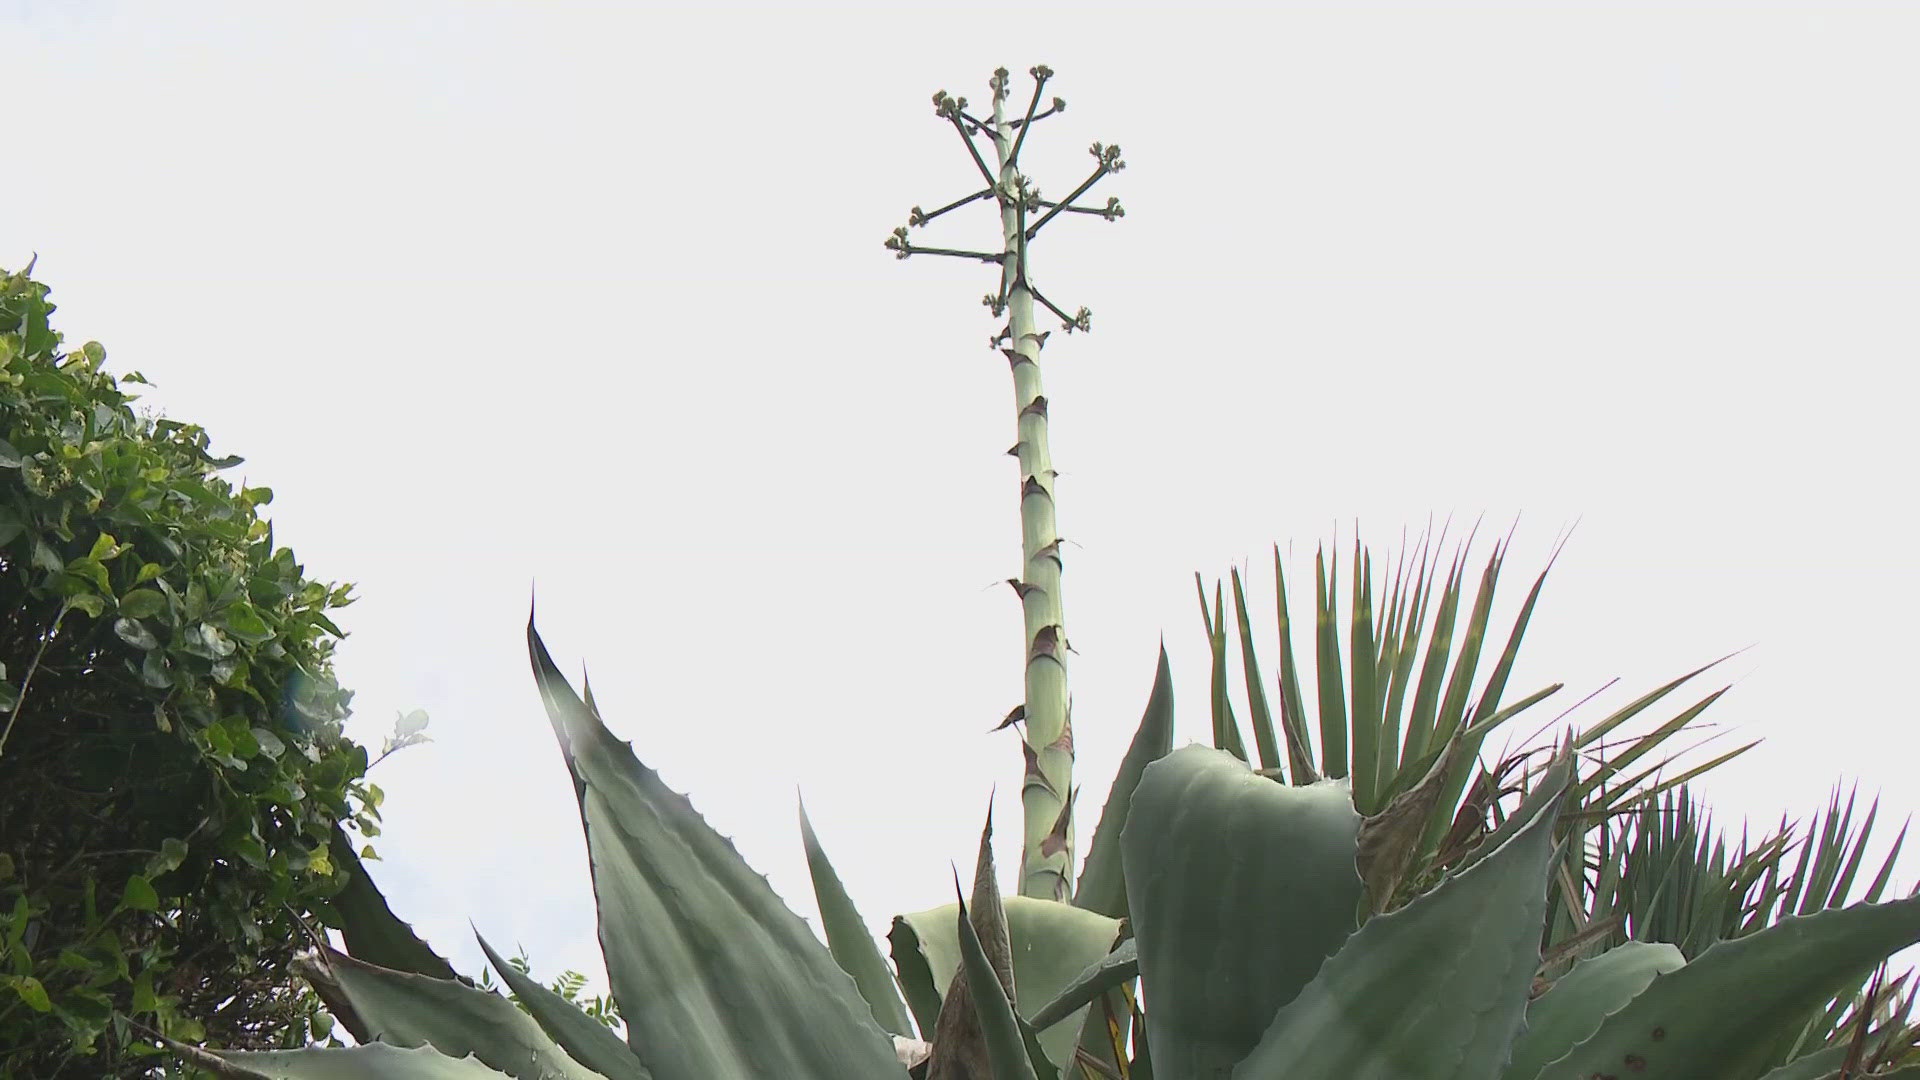 In Virginia Beach, a 2-story-tall plant is turning heads on Dam Neck Road. The agave americana plant stands around 20 feet high and this bloom is rare.